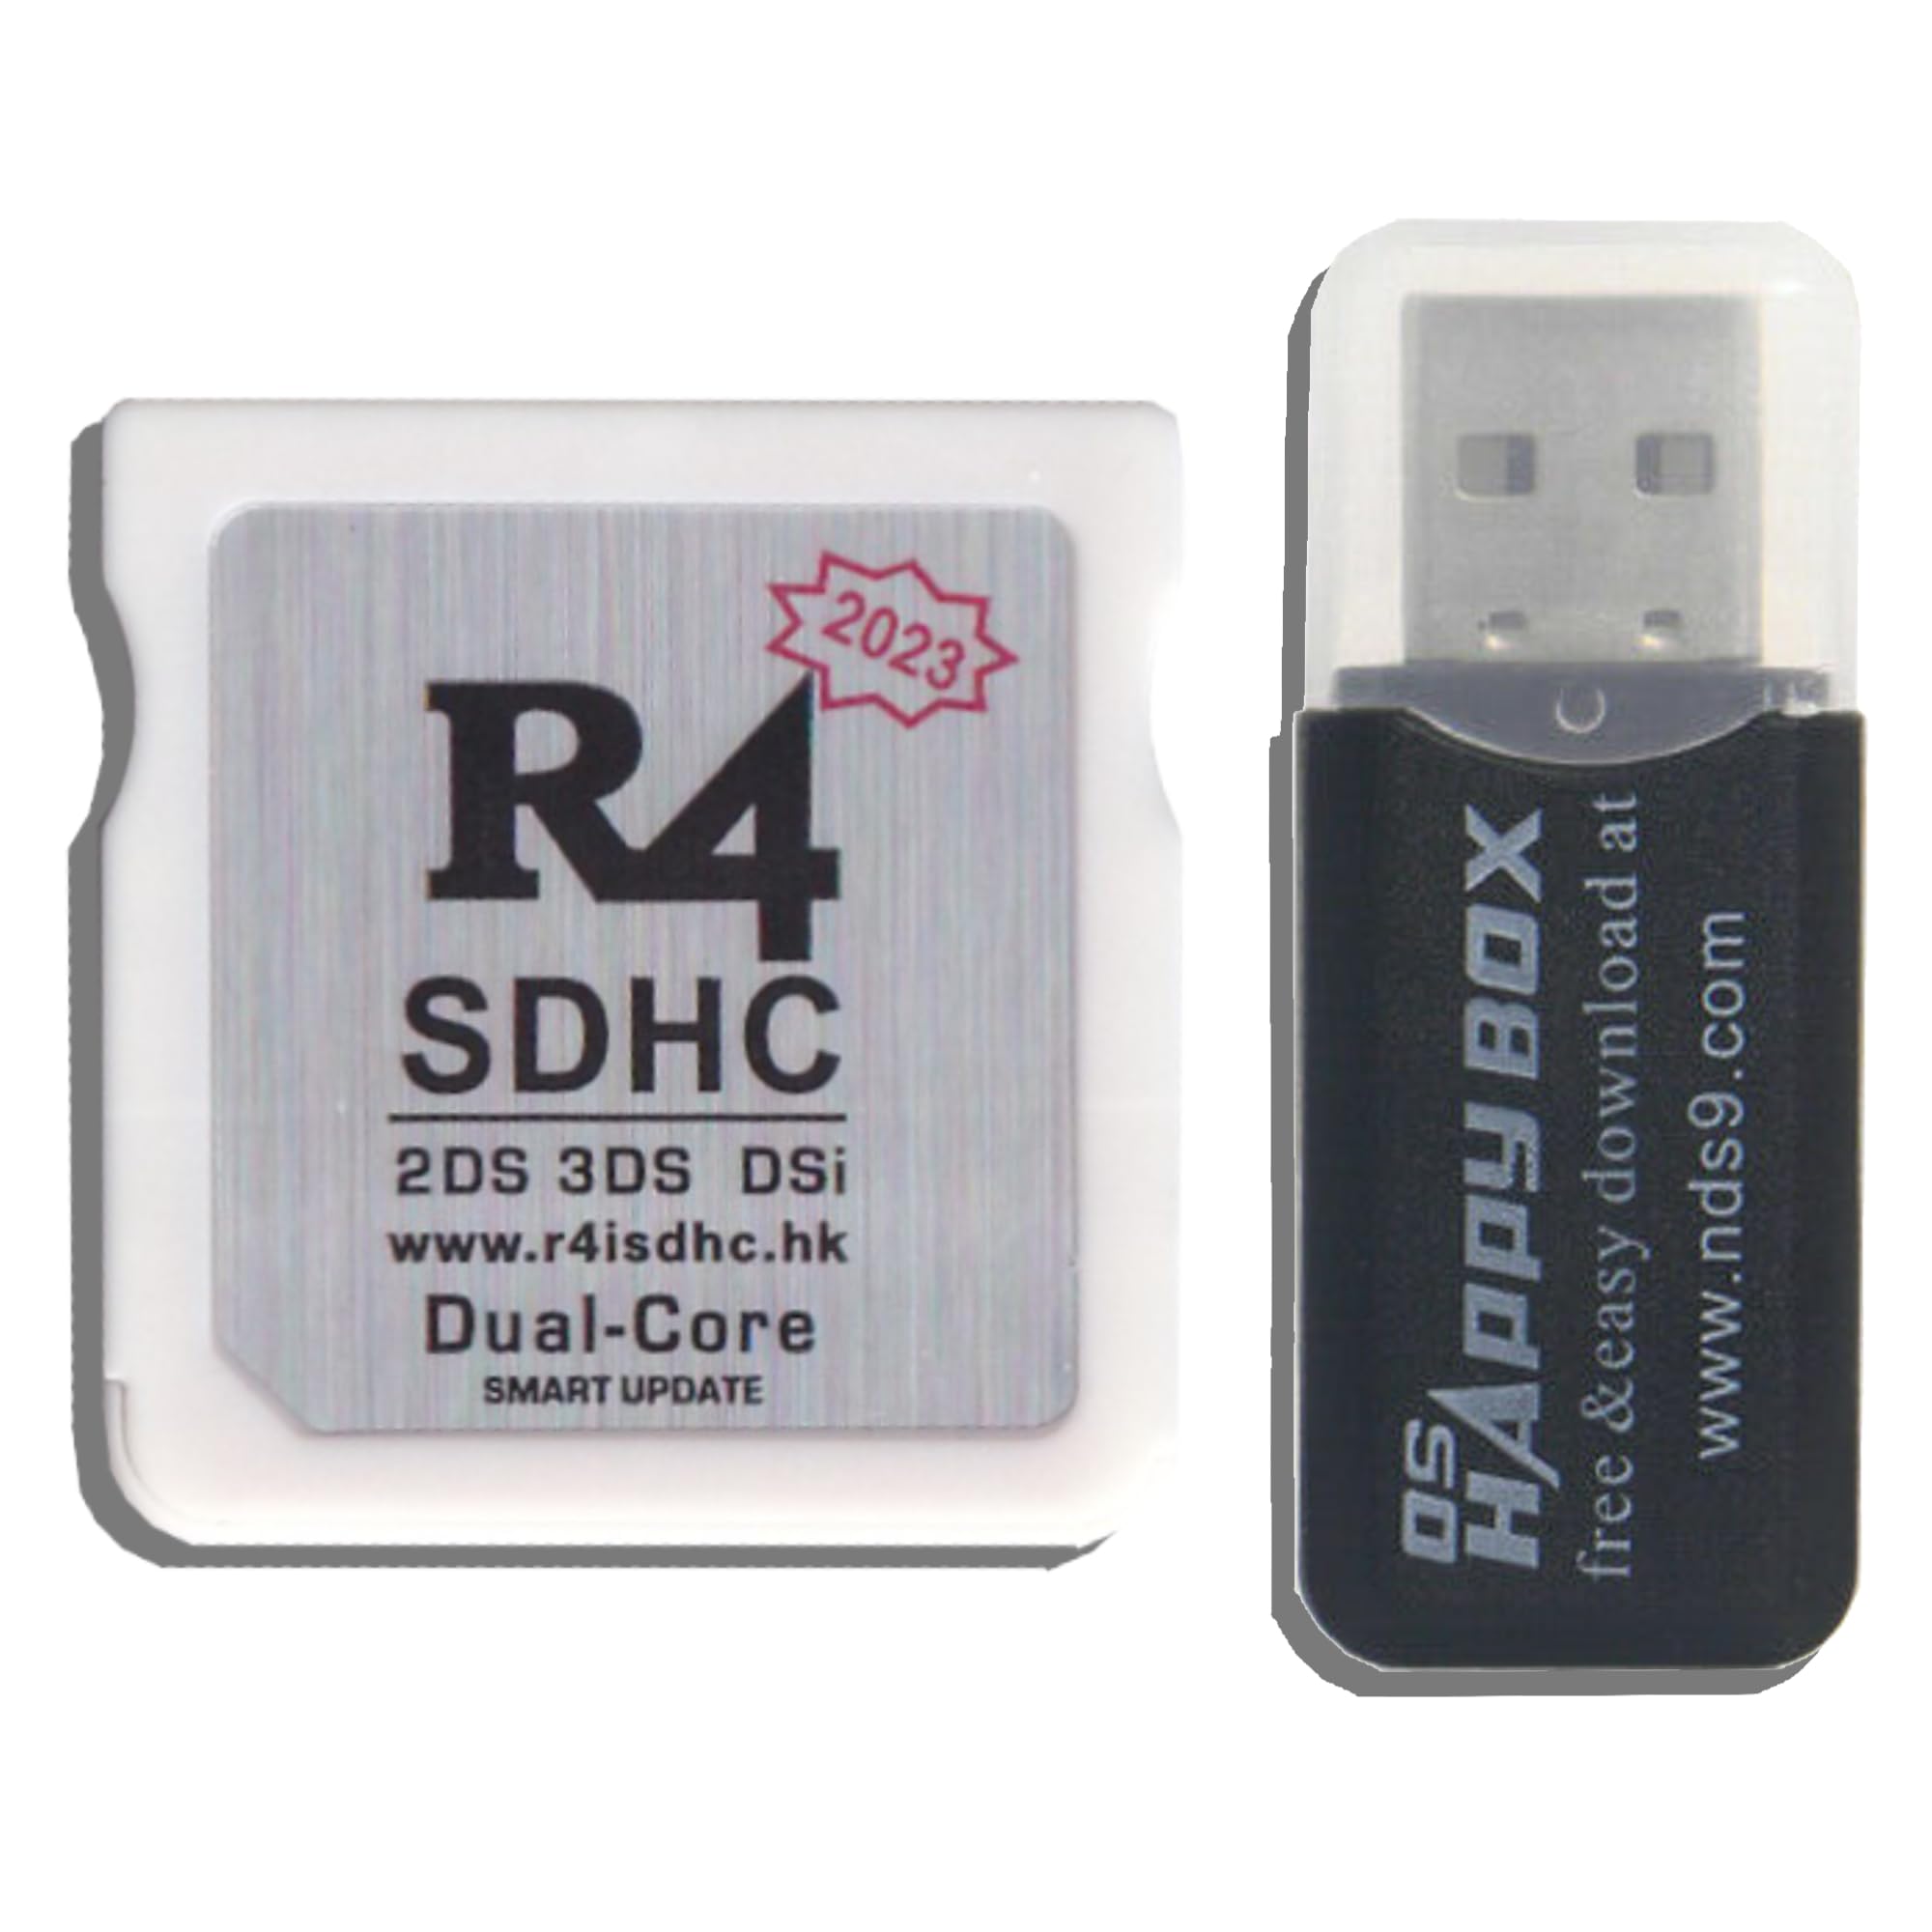 R4 2023 HK SDHC Dual Core Update Adapter Memory Card for NDS DS DSI 2DS 3DS New 2DS New 3DS XL, No Game Timebomb